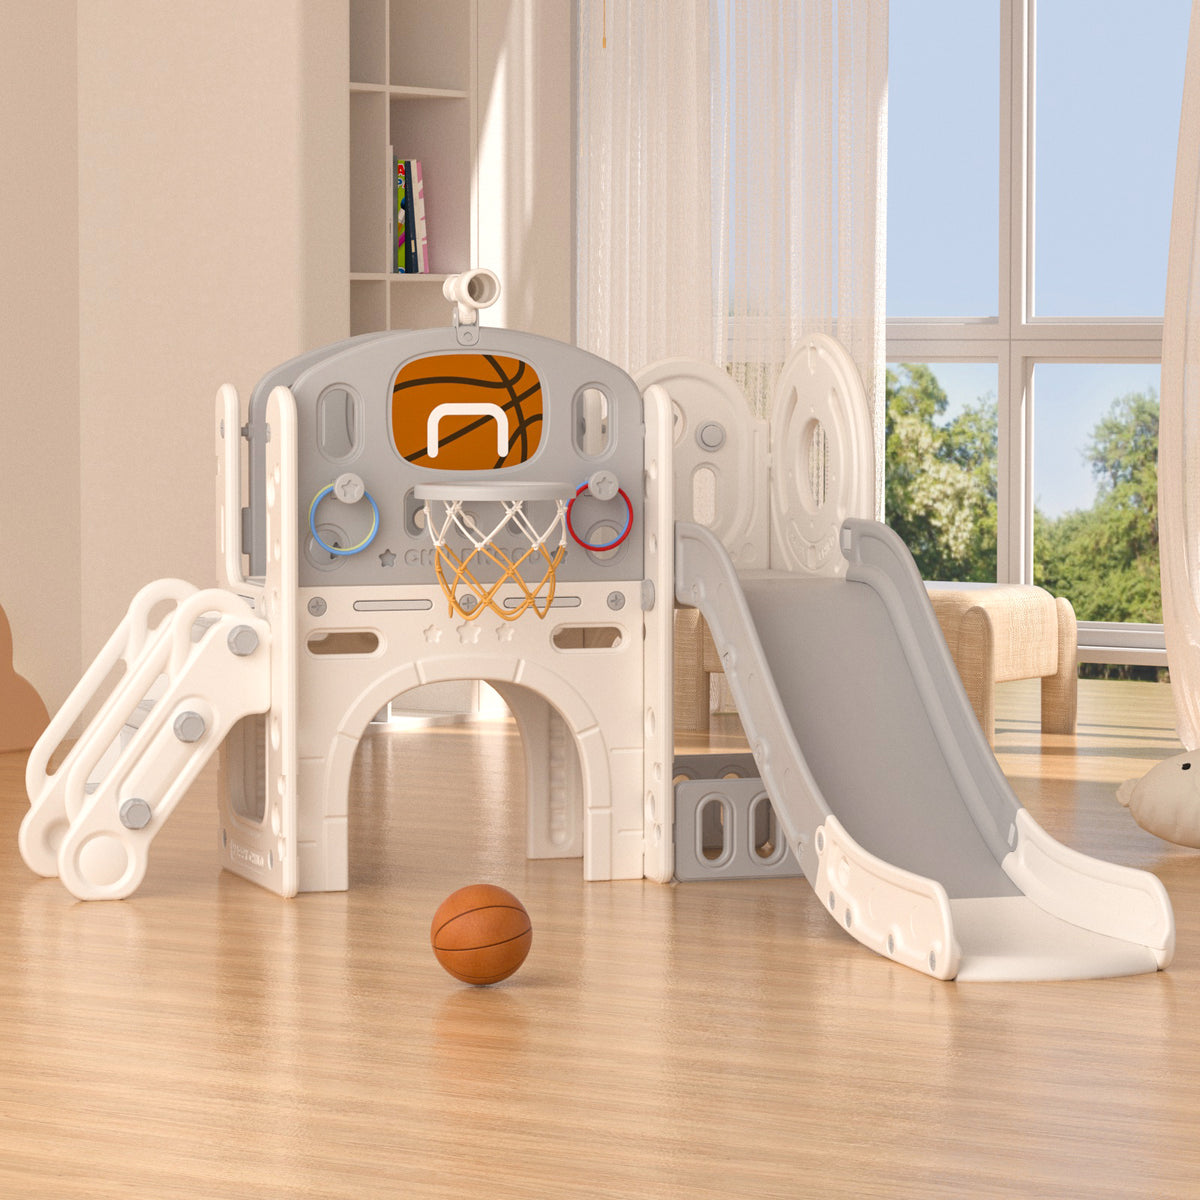 XJD 8-in-1 Kids Slide with Climber with Basketball Hoop, Tunnel, Telescope and Storage Space, Freestanding Indoor/Outdoor Toddler Play Set, White Gray